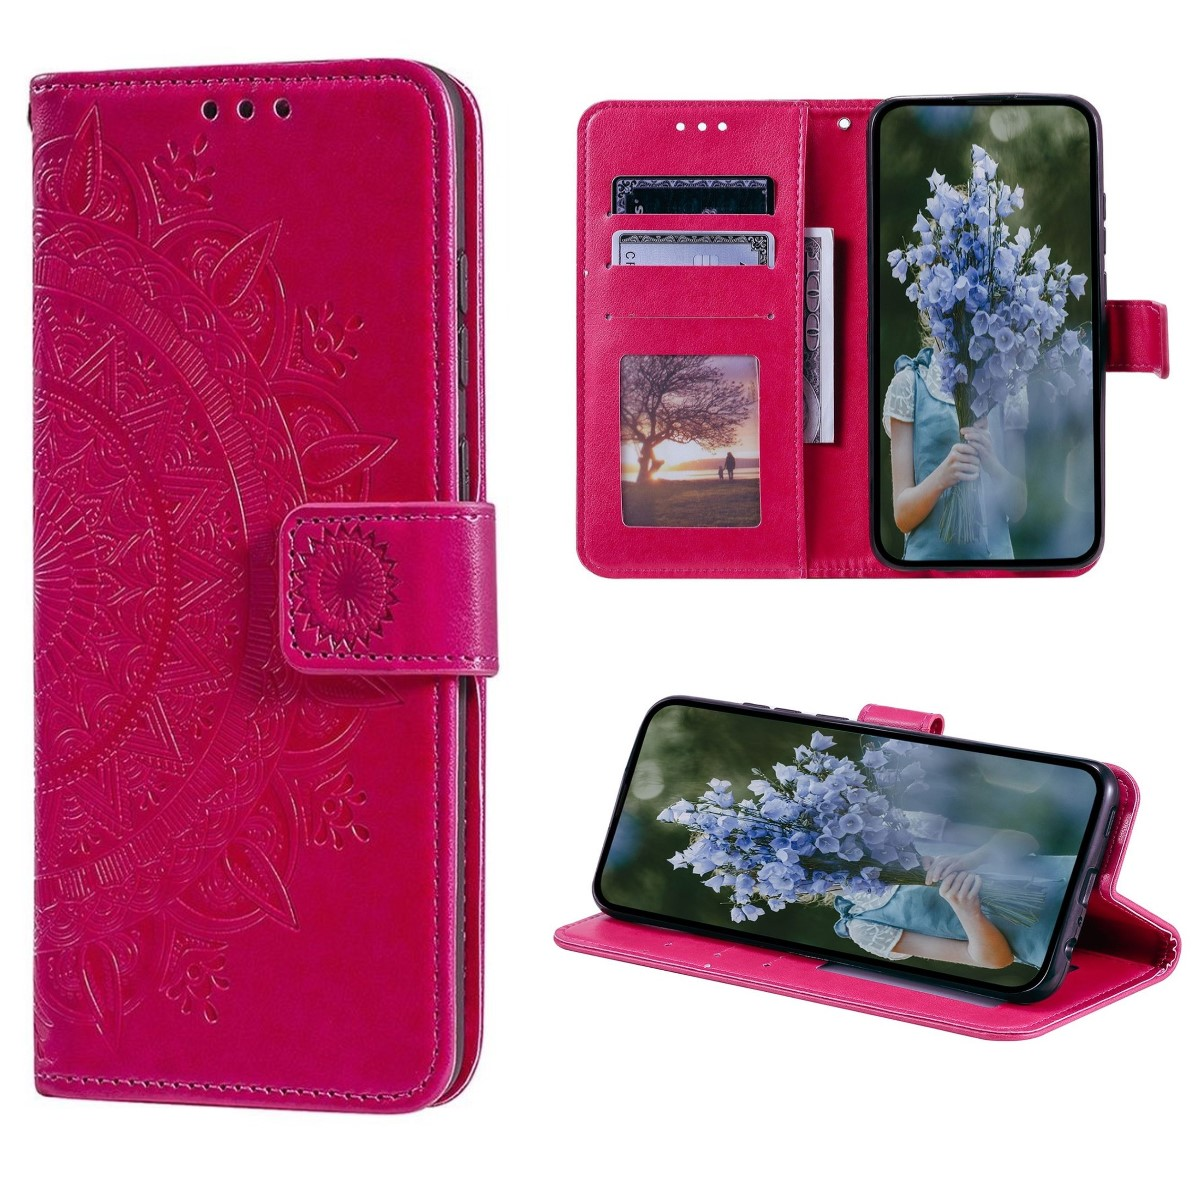 Pro, Bookcover, Pink Muster, iPhone Apple, Klapphülle Mandala COVERKINGZ 14 mit